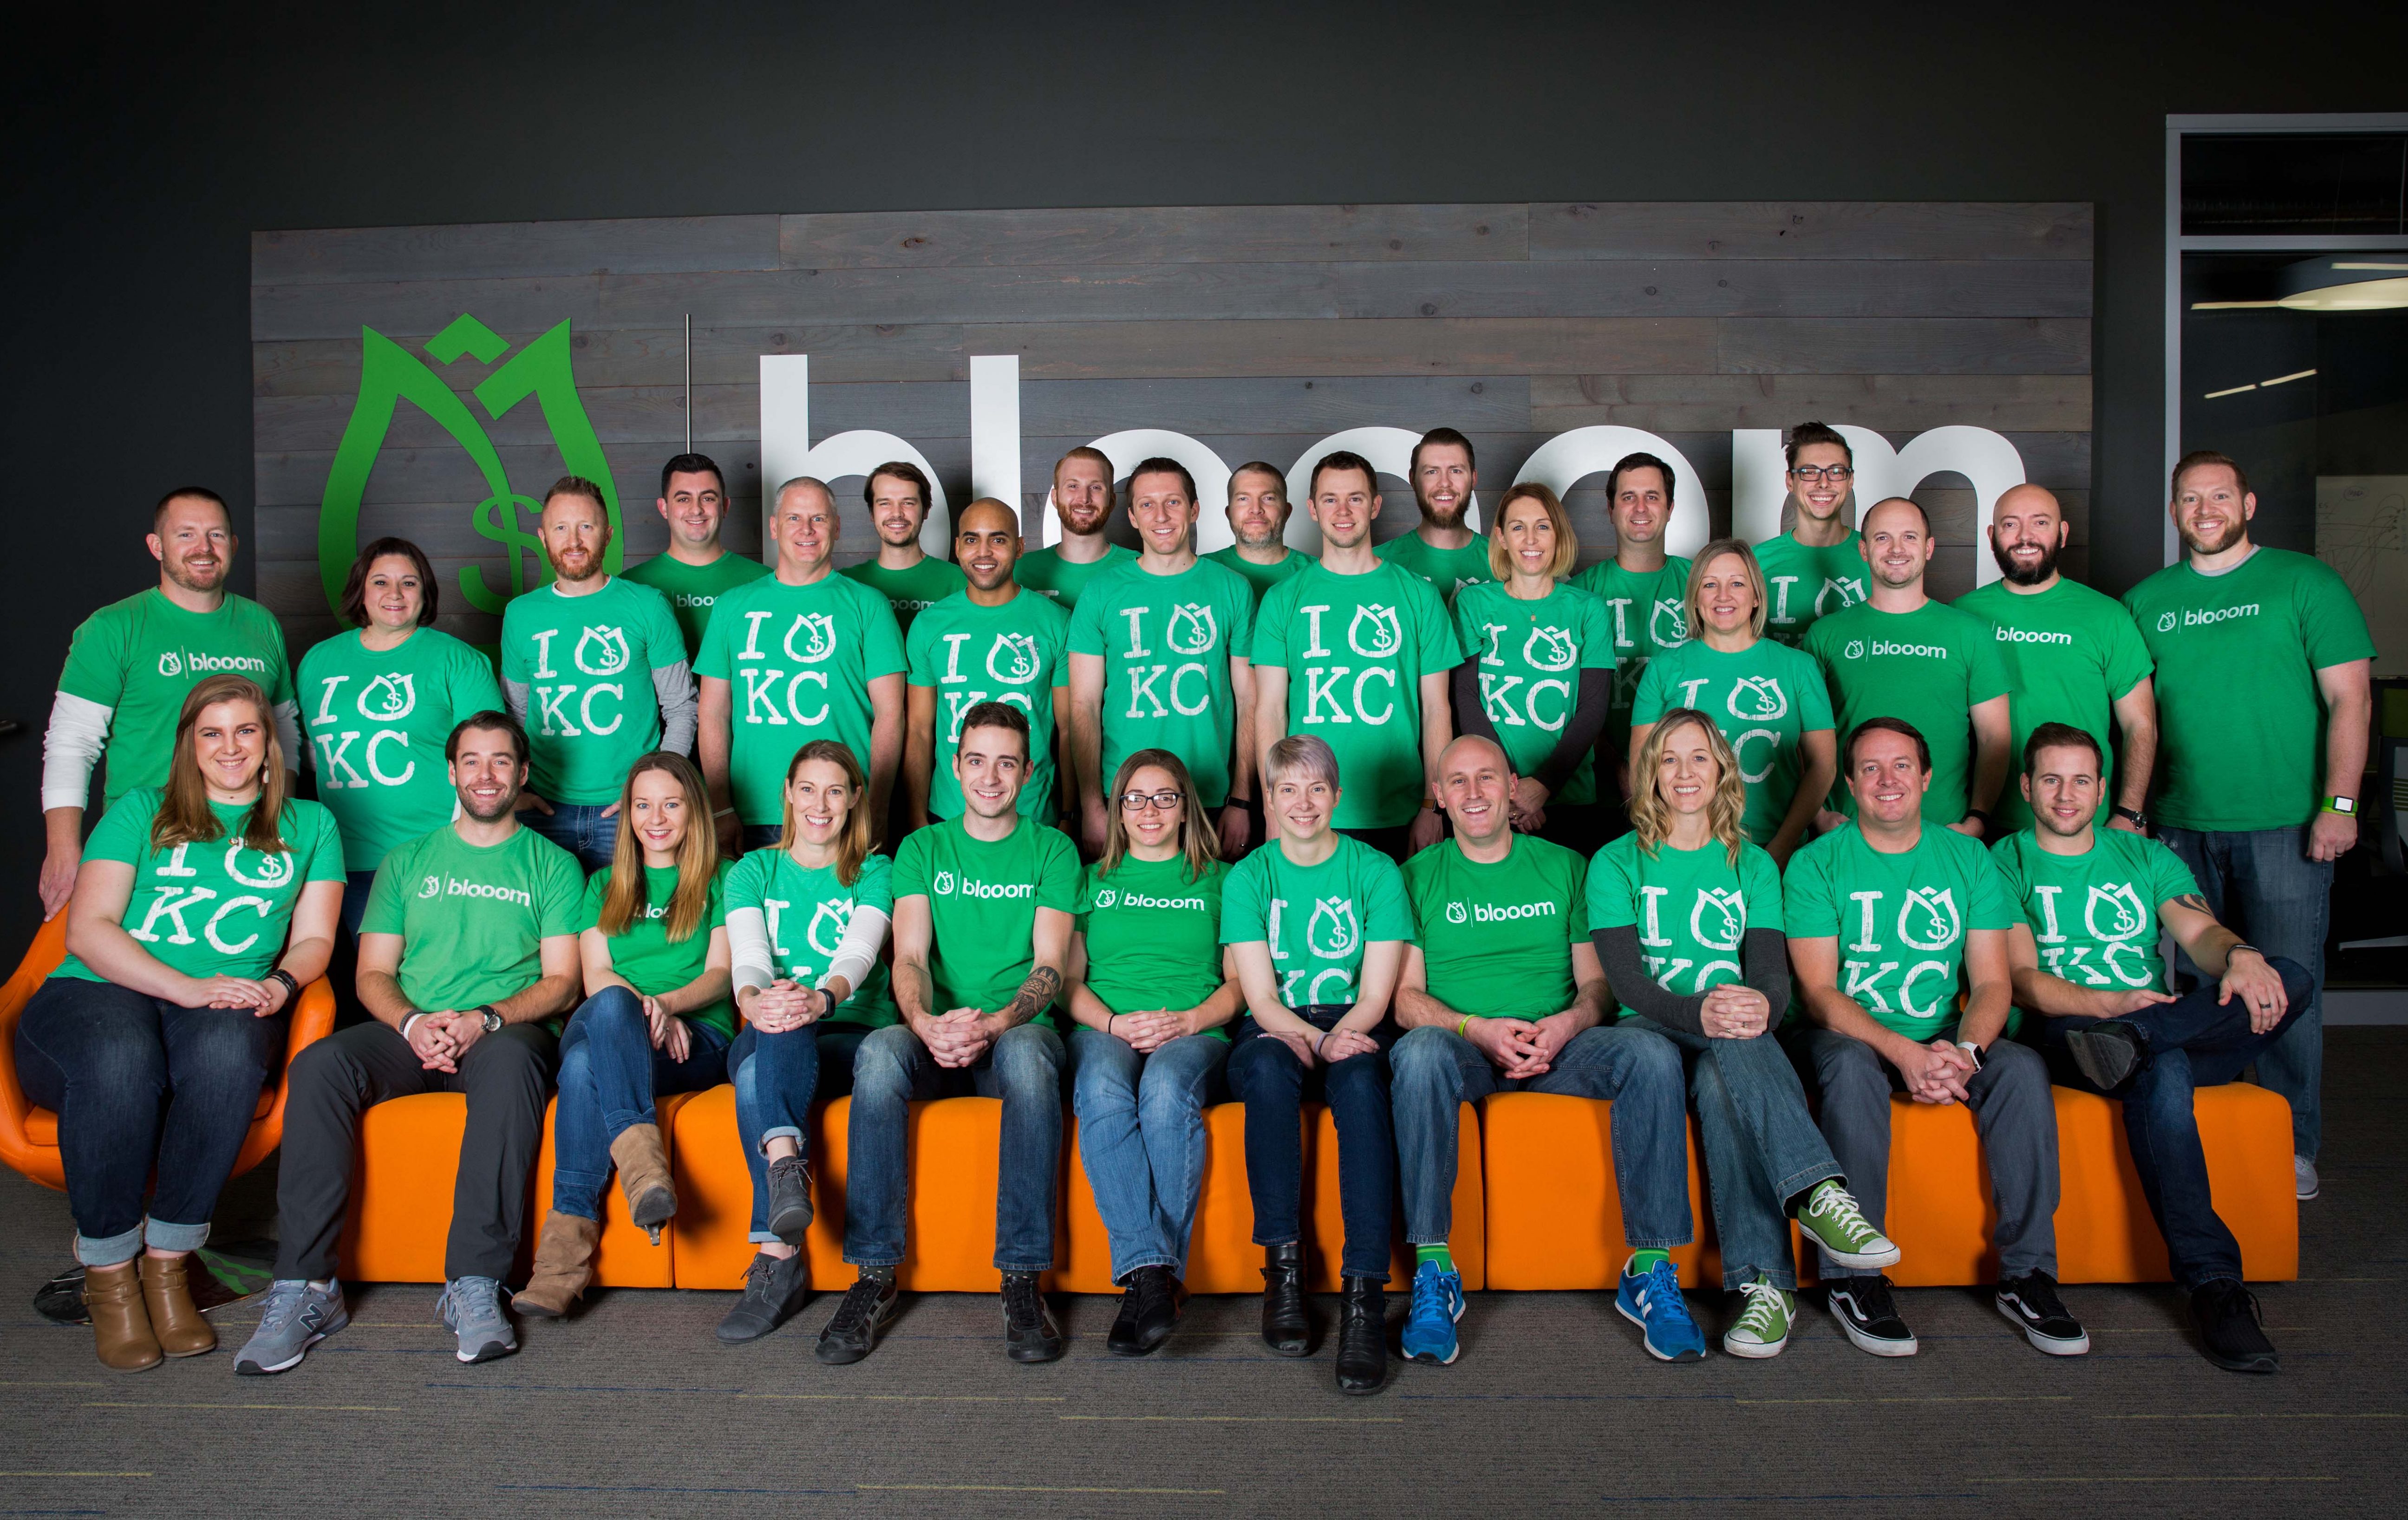 With investors clamoring for more, Blooom raises $9.15 million